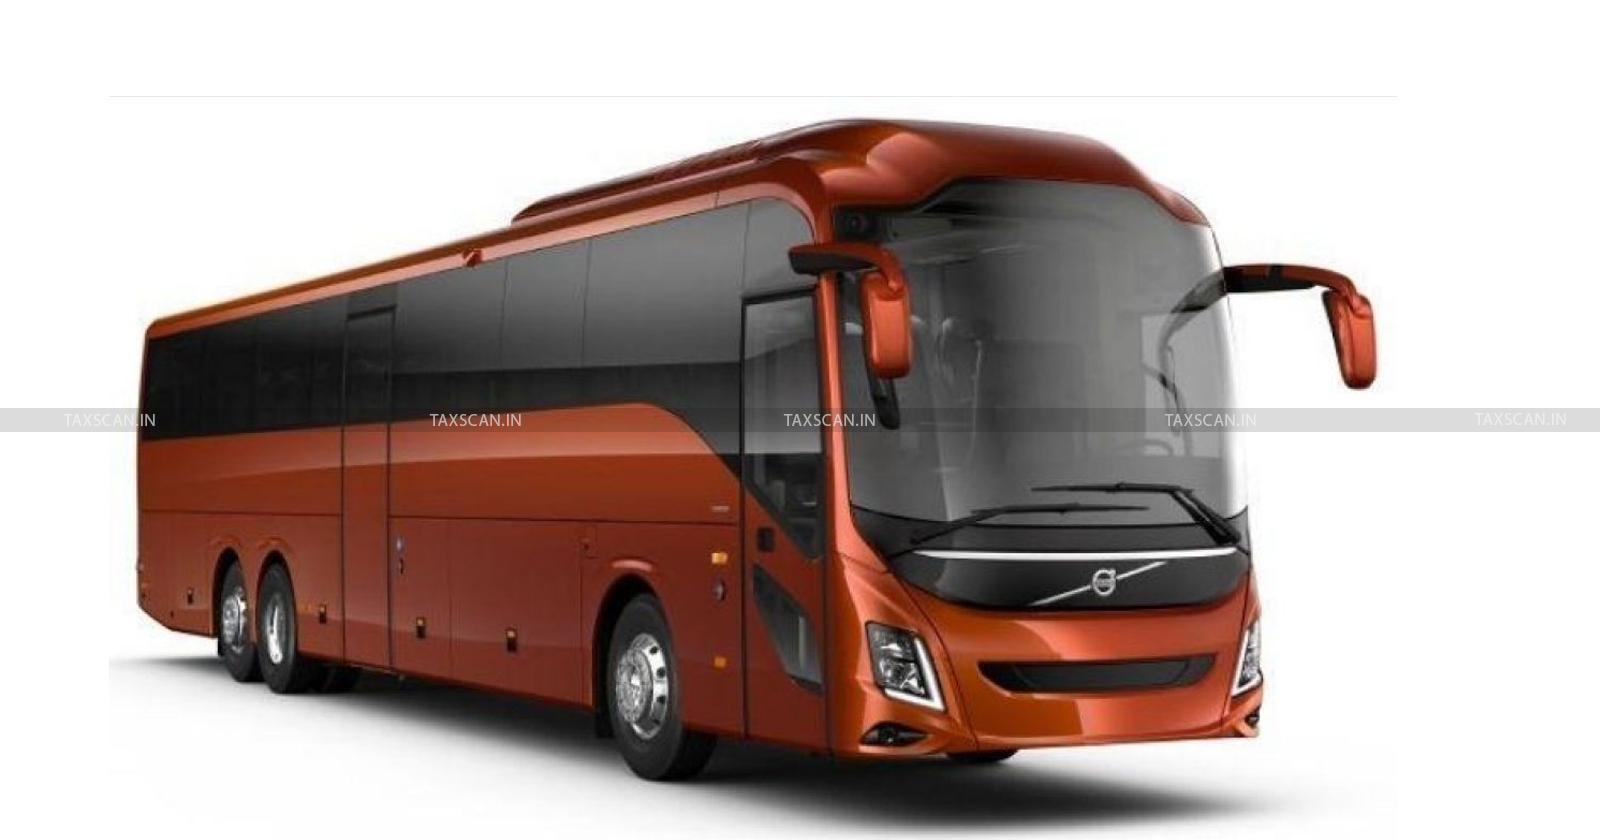 Ownership - Chassis - Chassis Supply - Agreement - CESTAT - Volvo Buses India Eligible - Excise Duty Exemption - taxscan